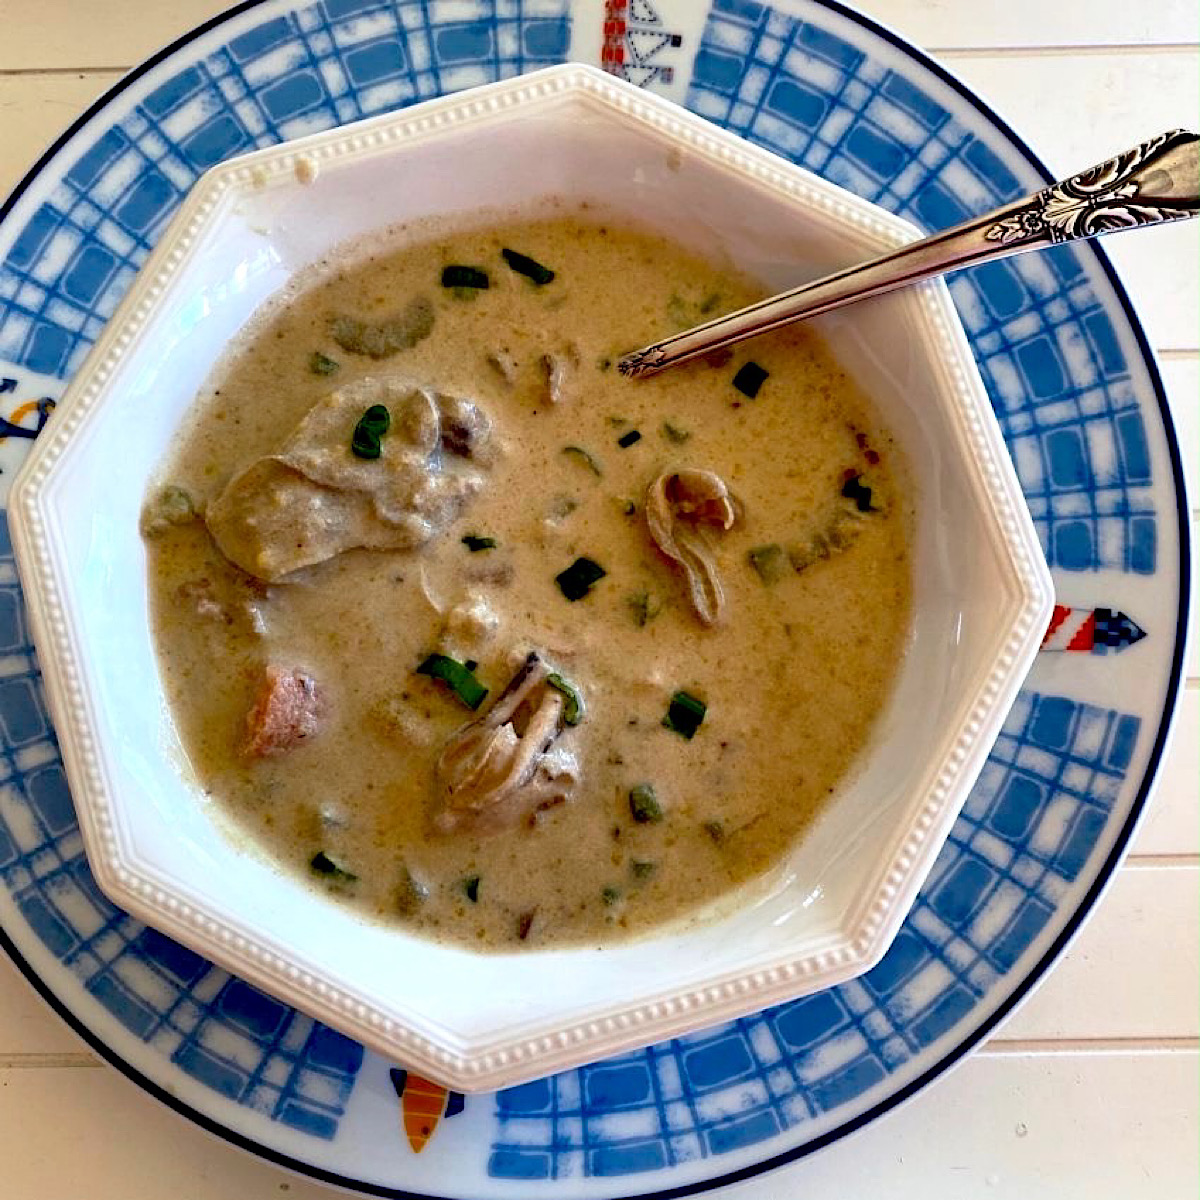 Oyster stew recipes - recipes